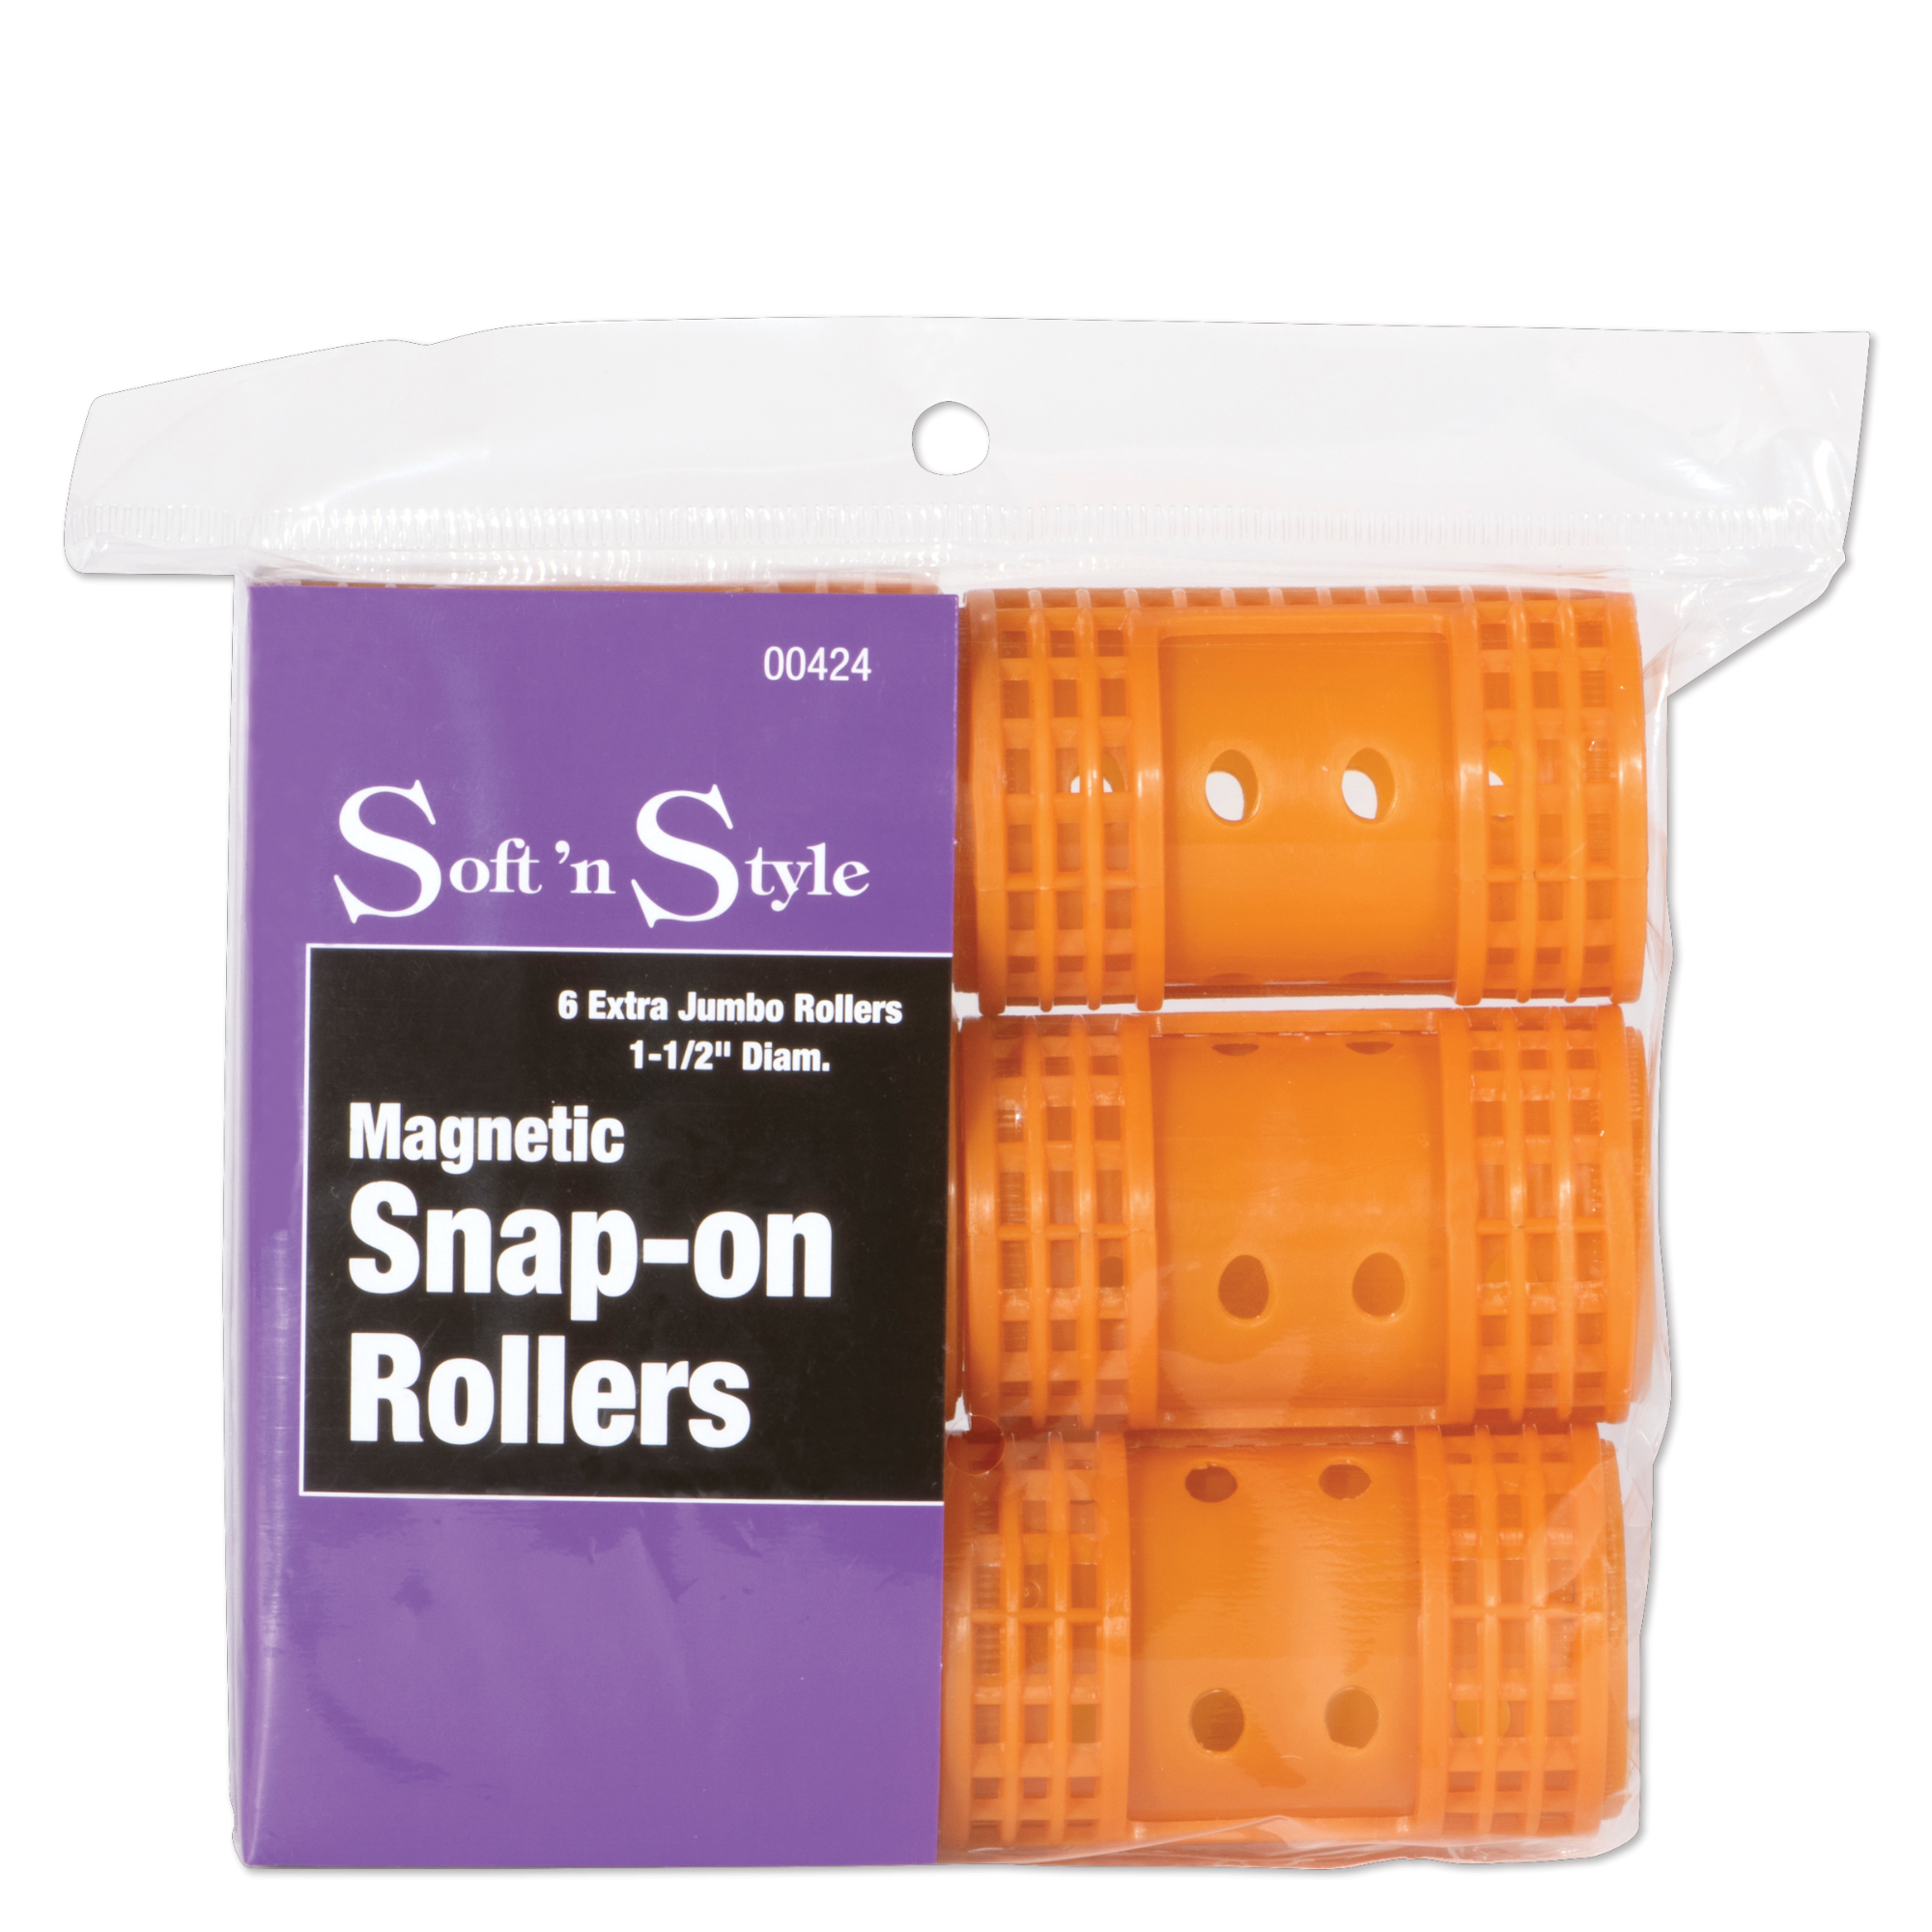 Magnetic Snap-on Rollers, Extra Jumbo - 1-1/2"